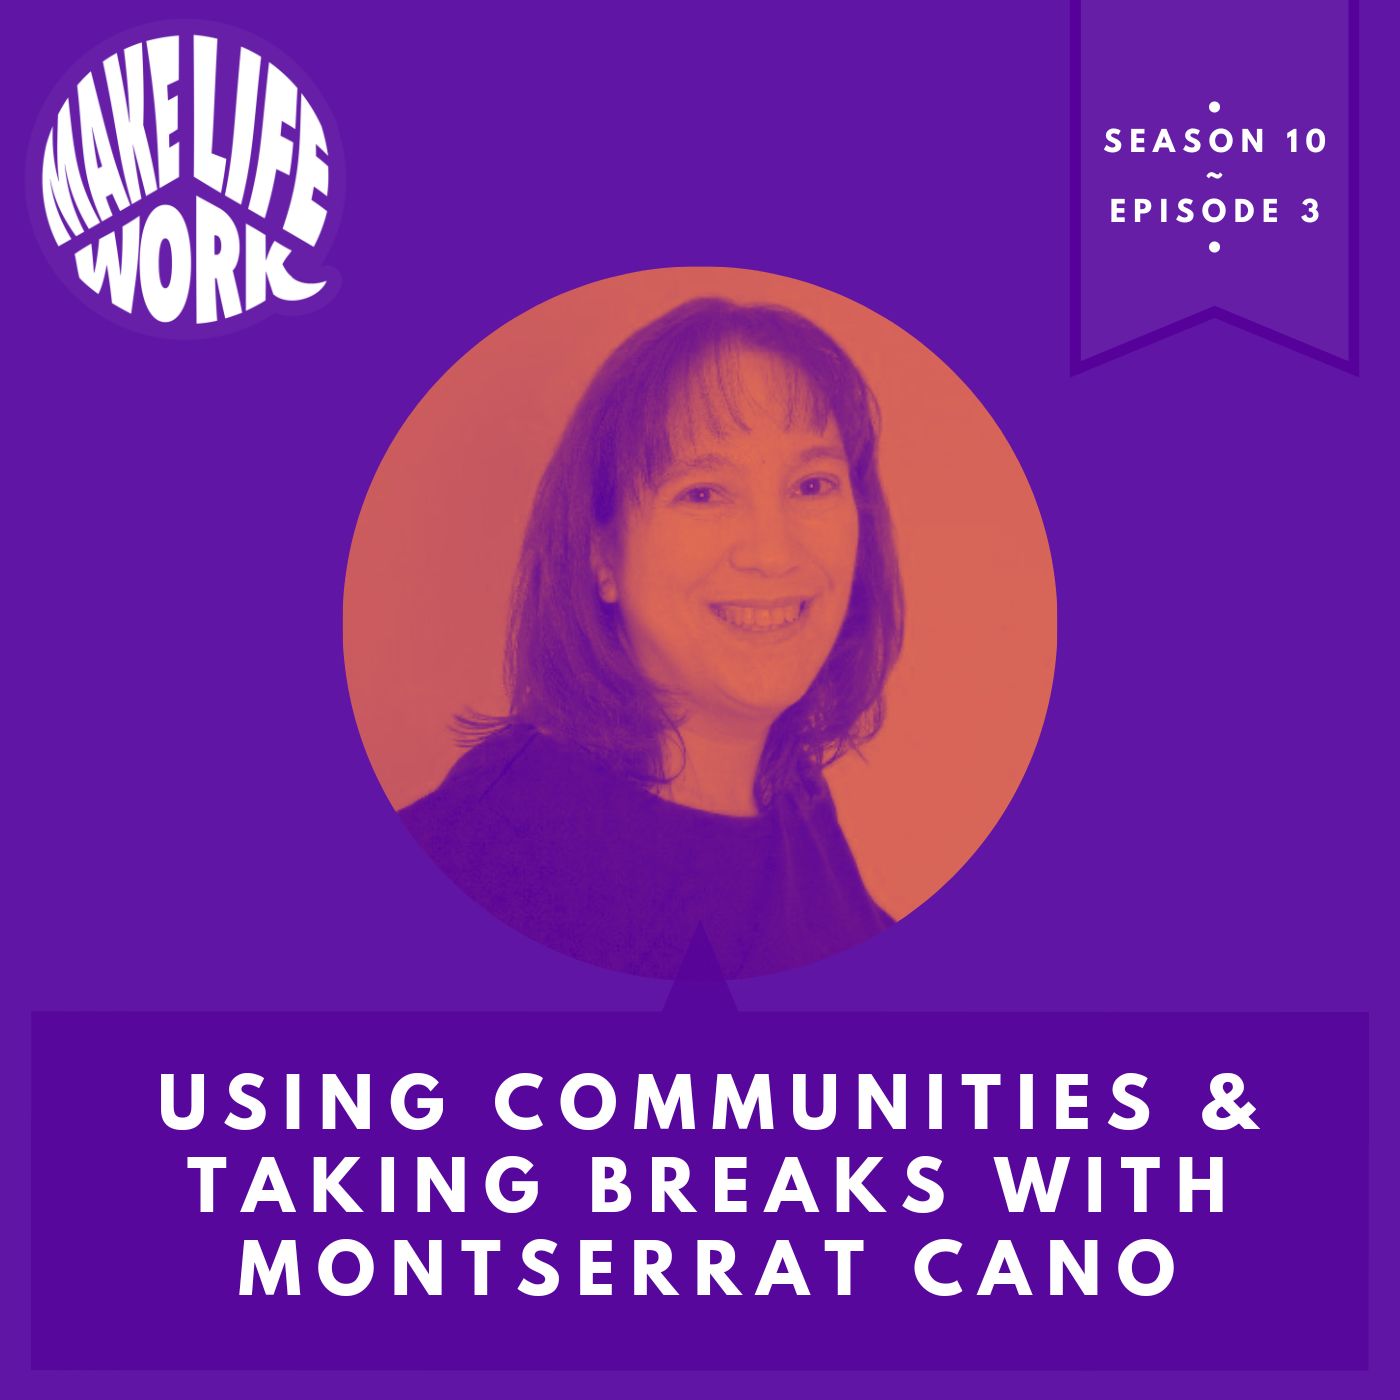 Using communities and taking breaks with Montserrat Cano